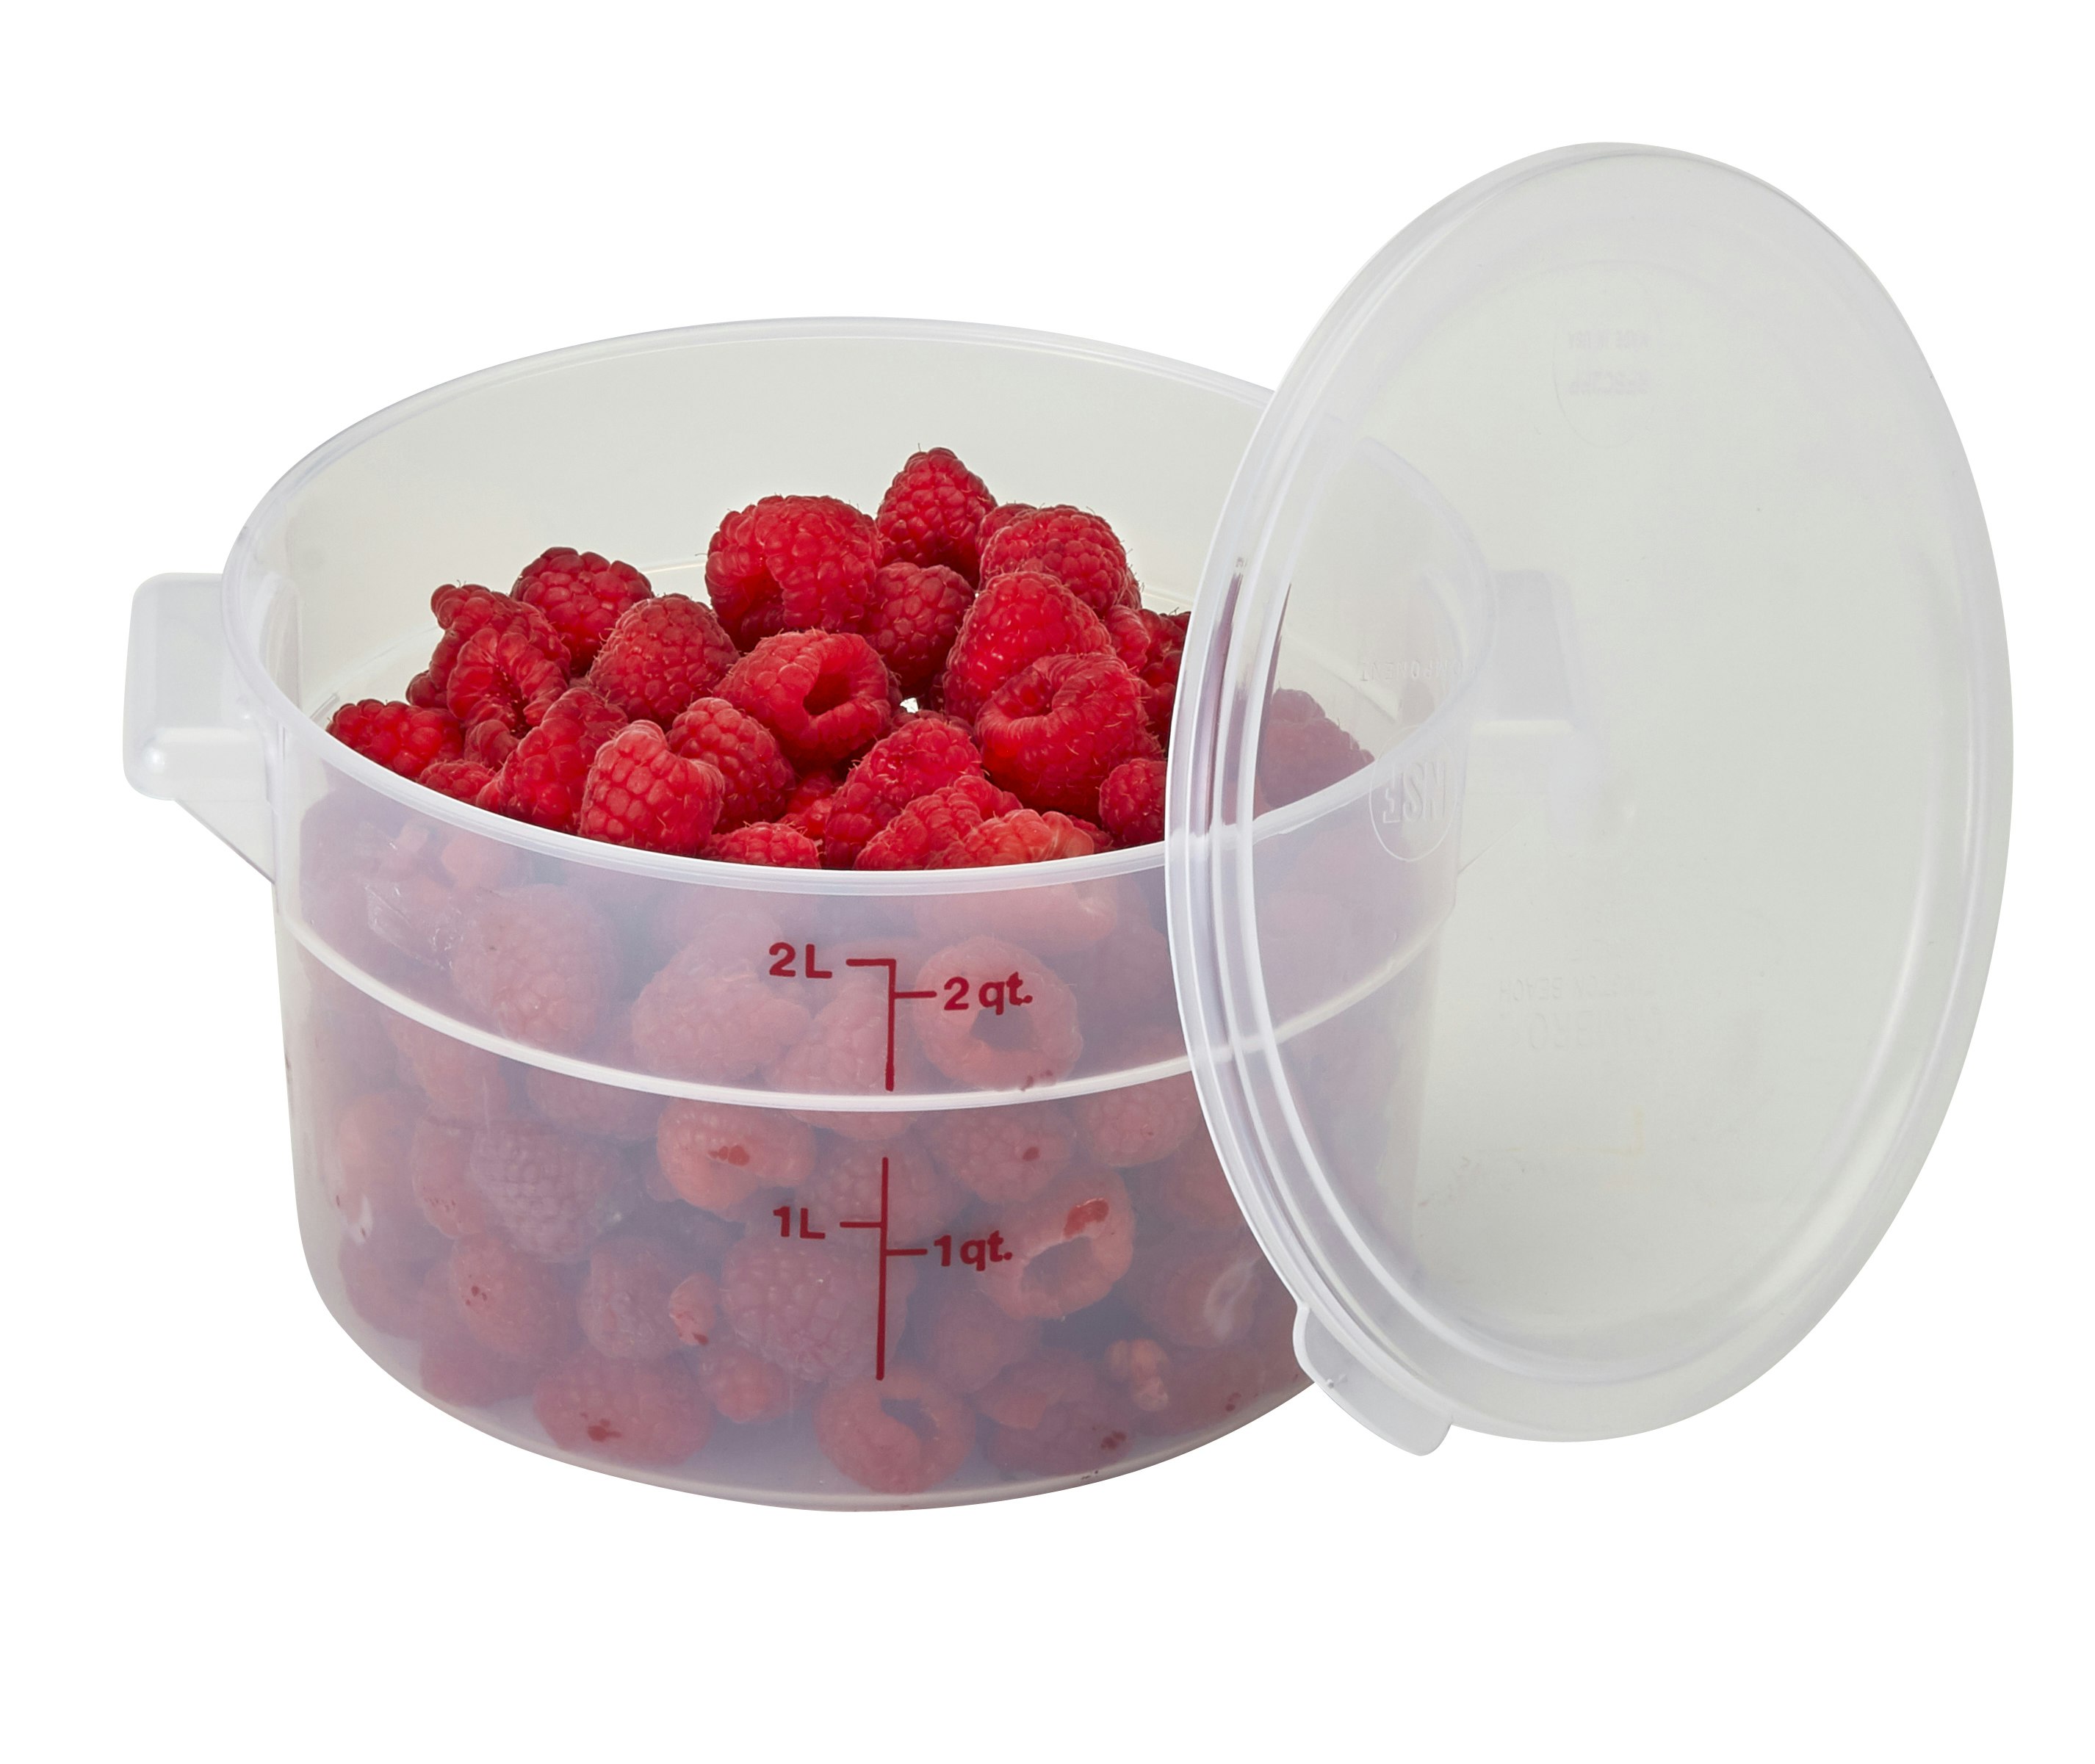 CAMBRO 1QT ROUND FOOD CONTAINER - Rush's Kitchen